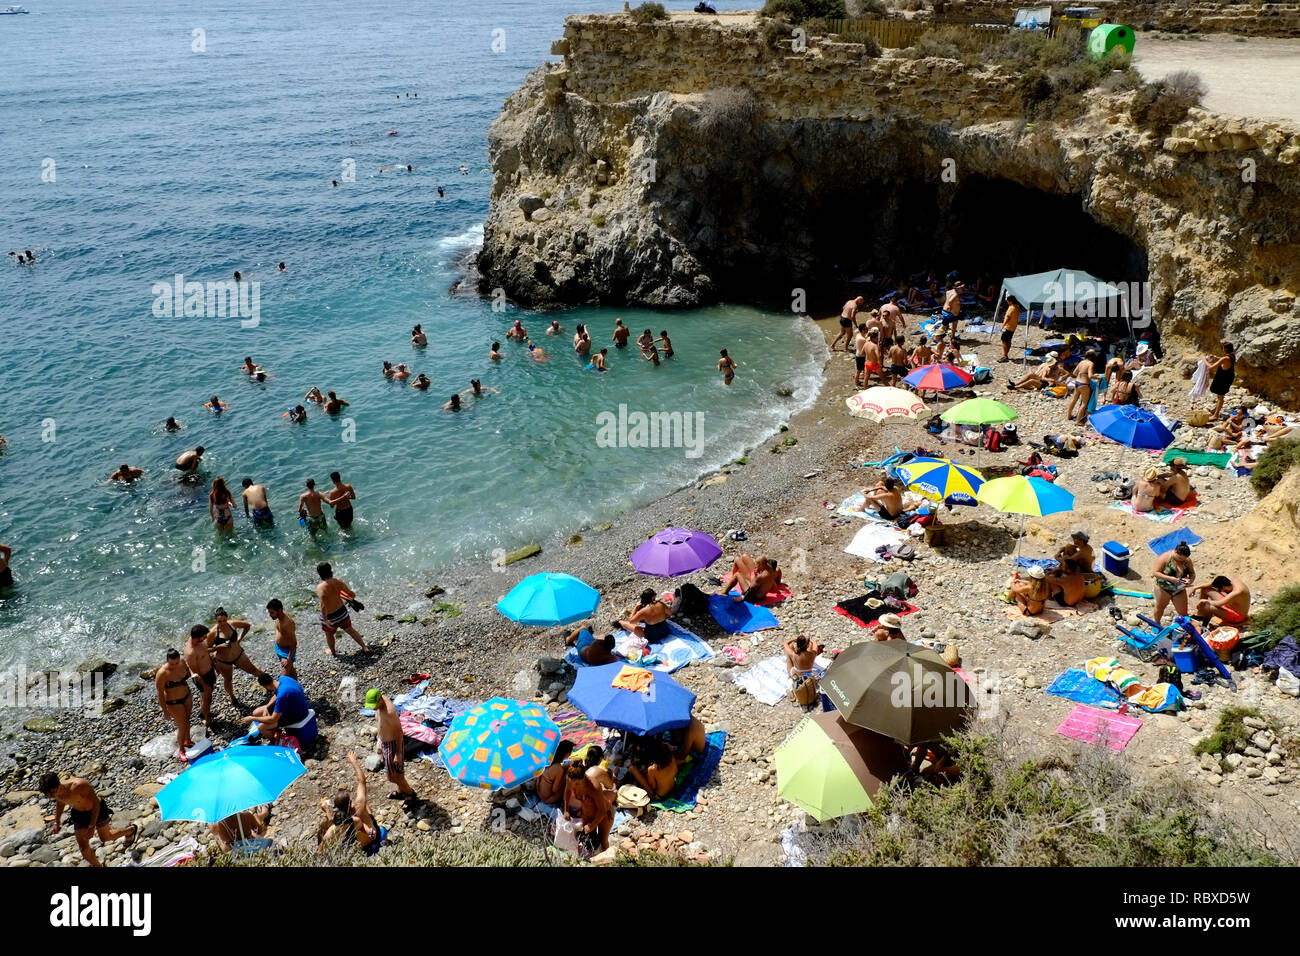 View of a crowded beach cove on the island of Tabarca, Alicante. Spain Stock Photo